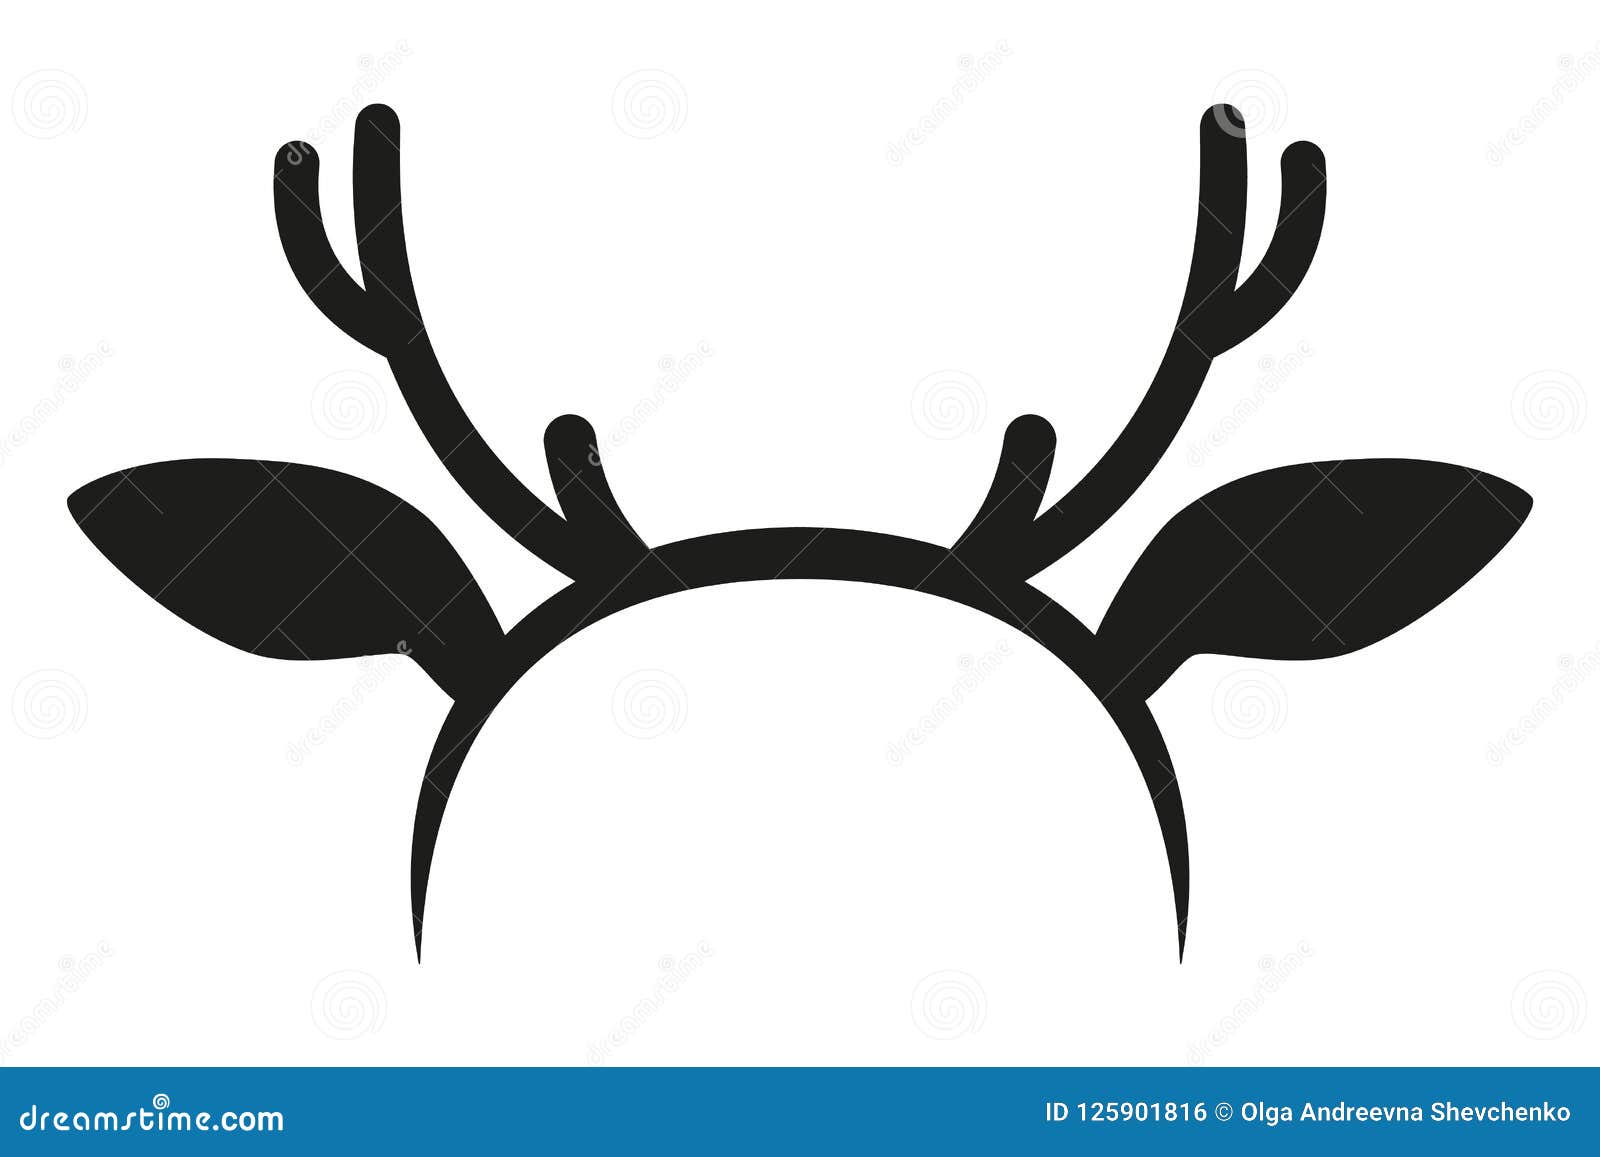 black and white reindeer antler hat silhouette